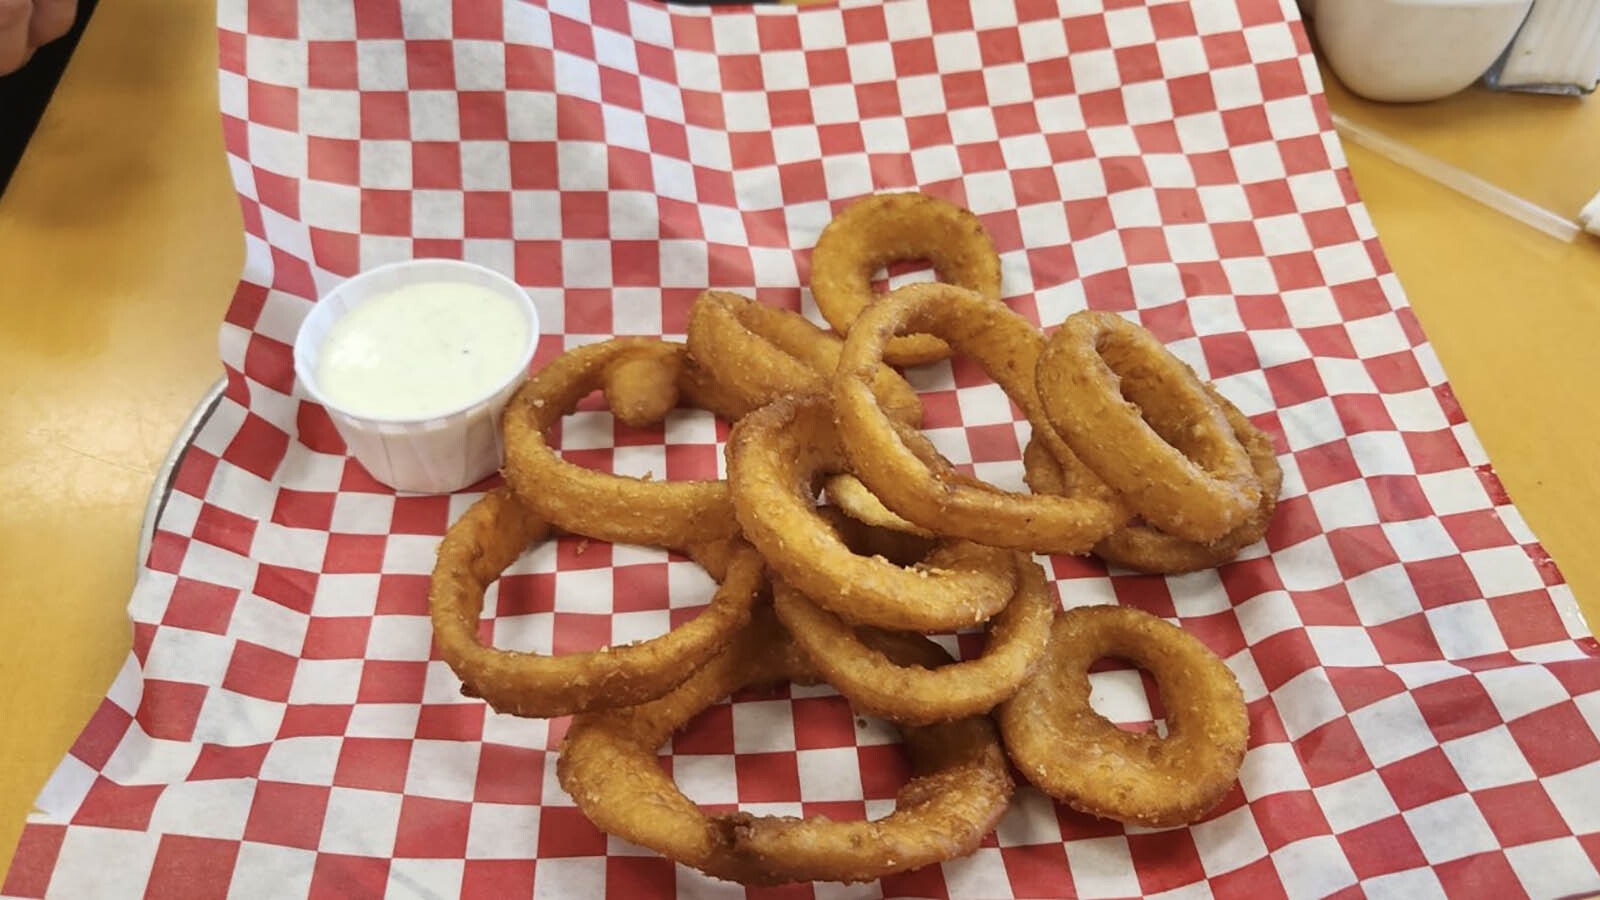 What would a classic diner be without kickin' onion rings?